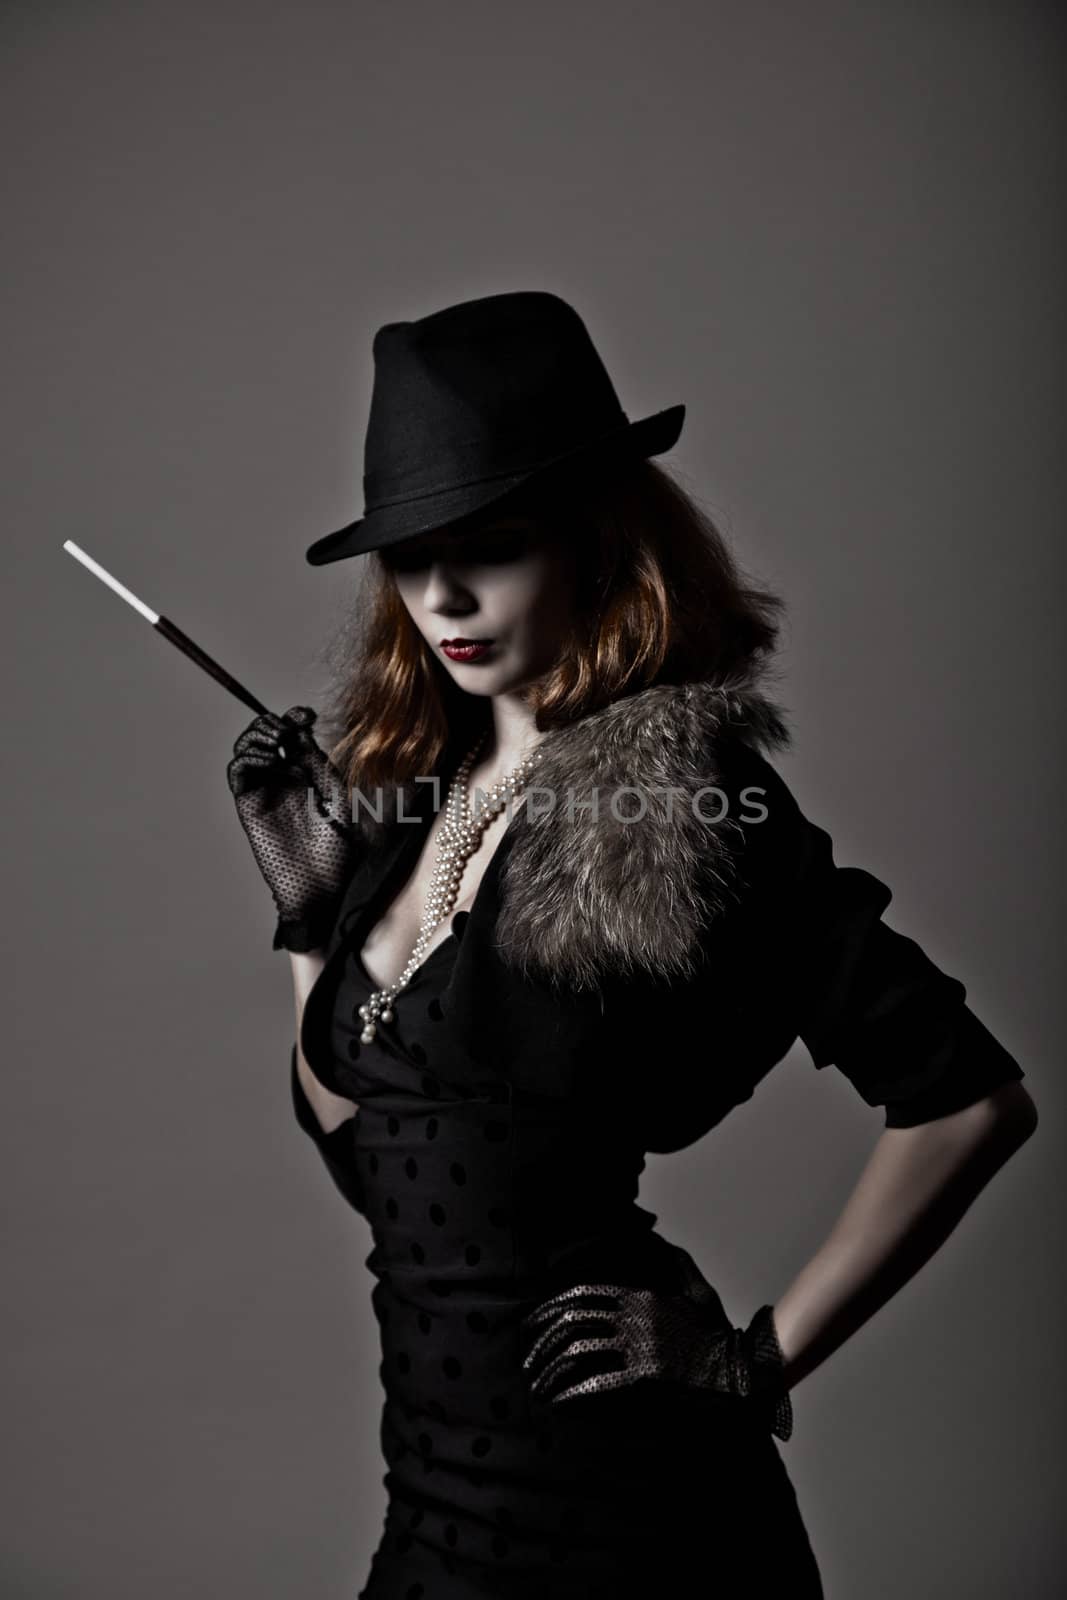 Retro shot of gangster woman in fedora hat and evening dress holding mouthpiece 